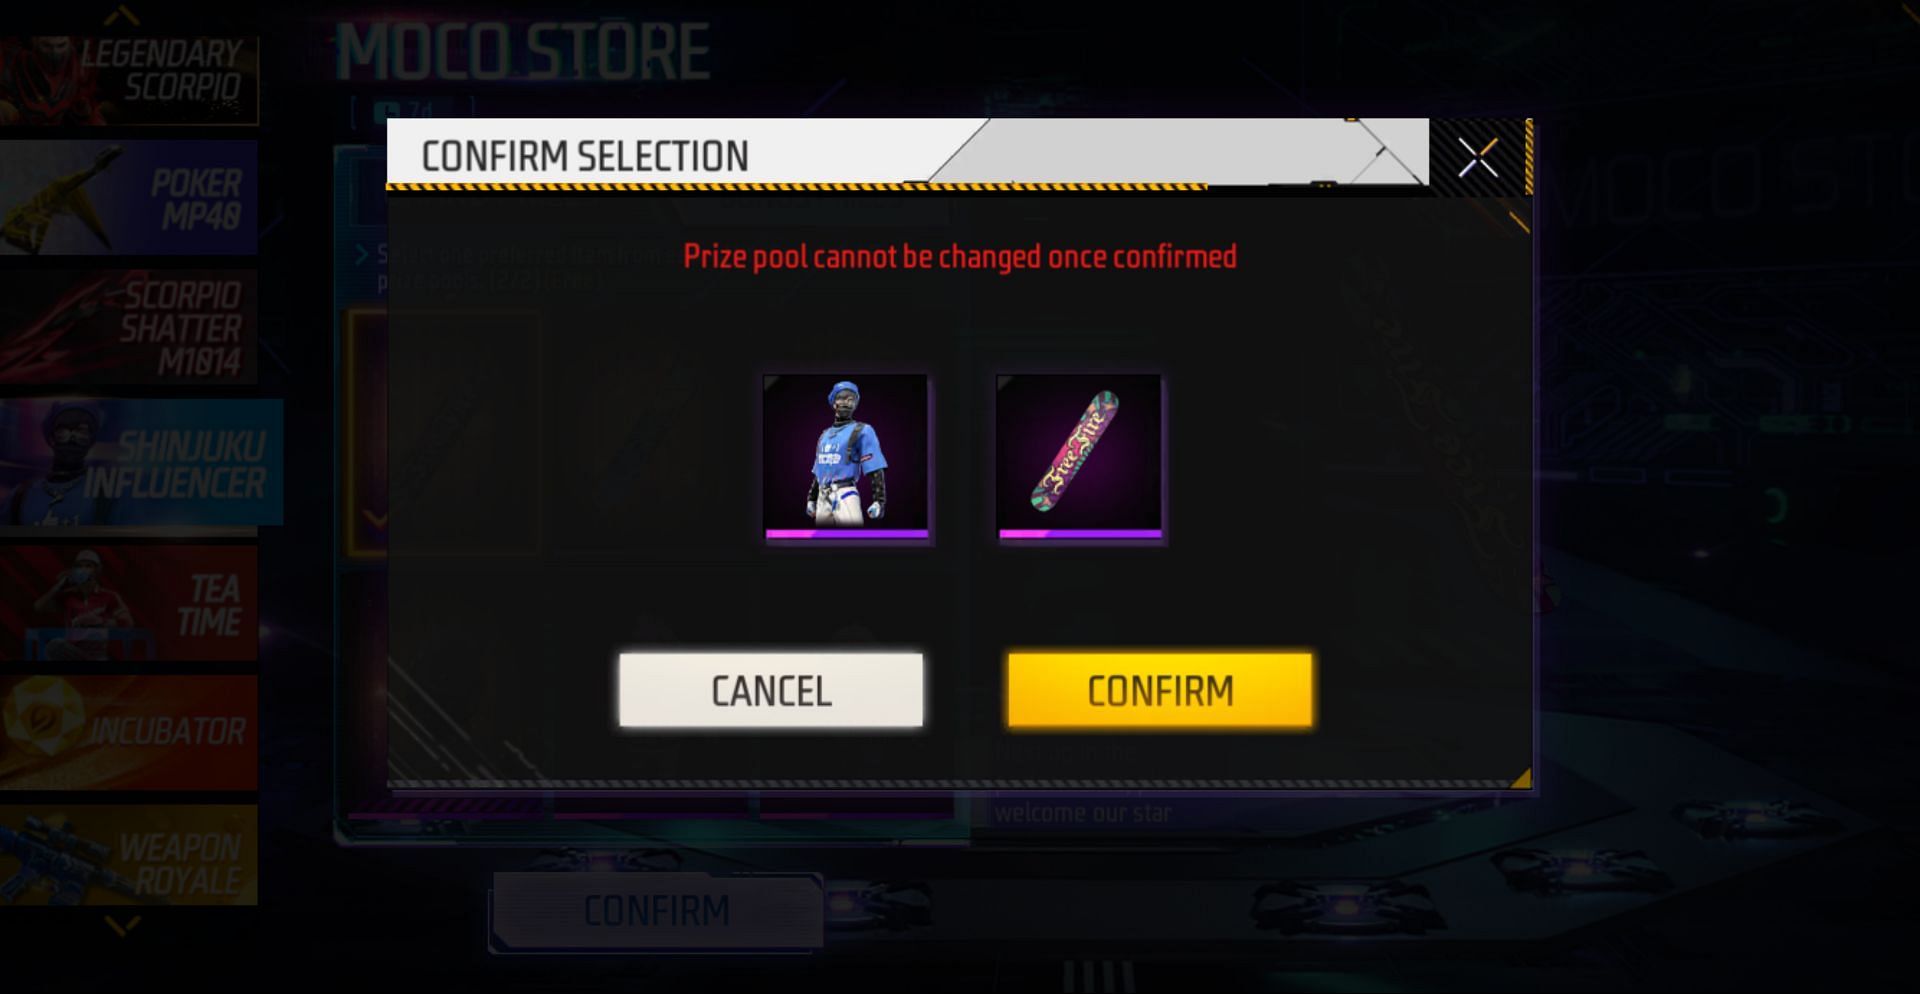 Confirm the selection to make spins in Moco Store (Image via Garena)